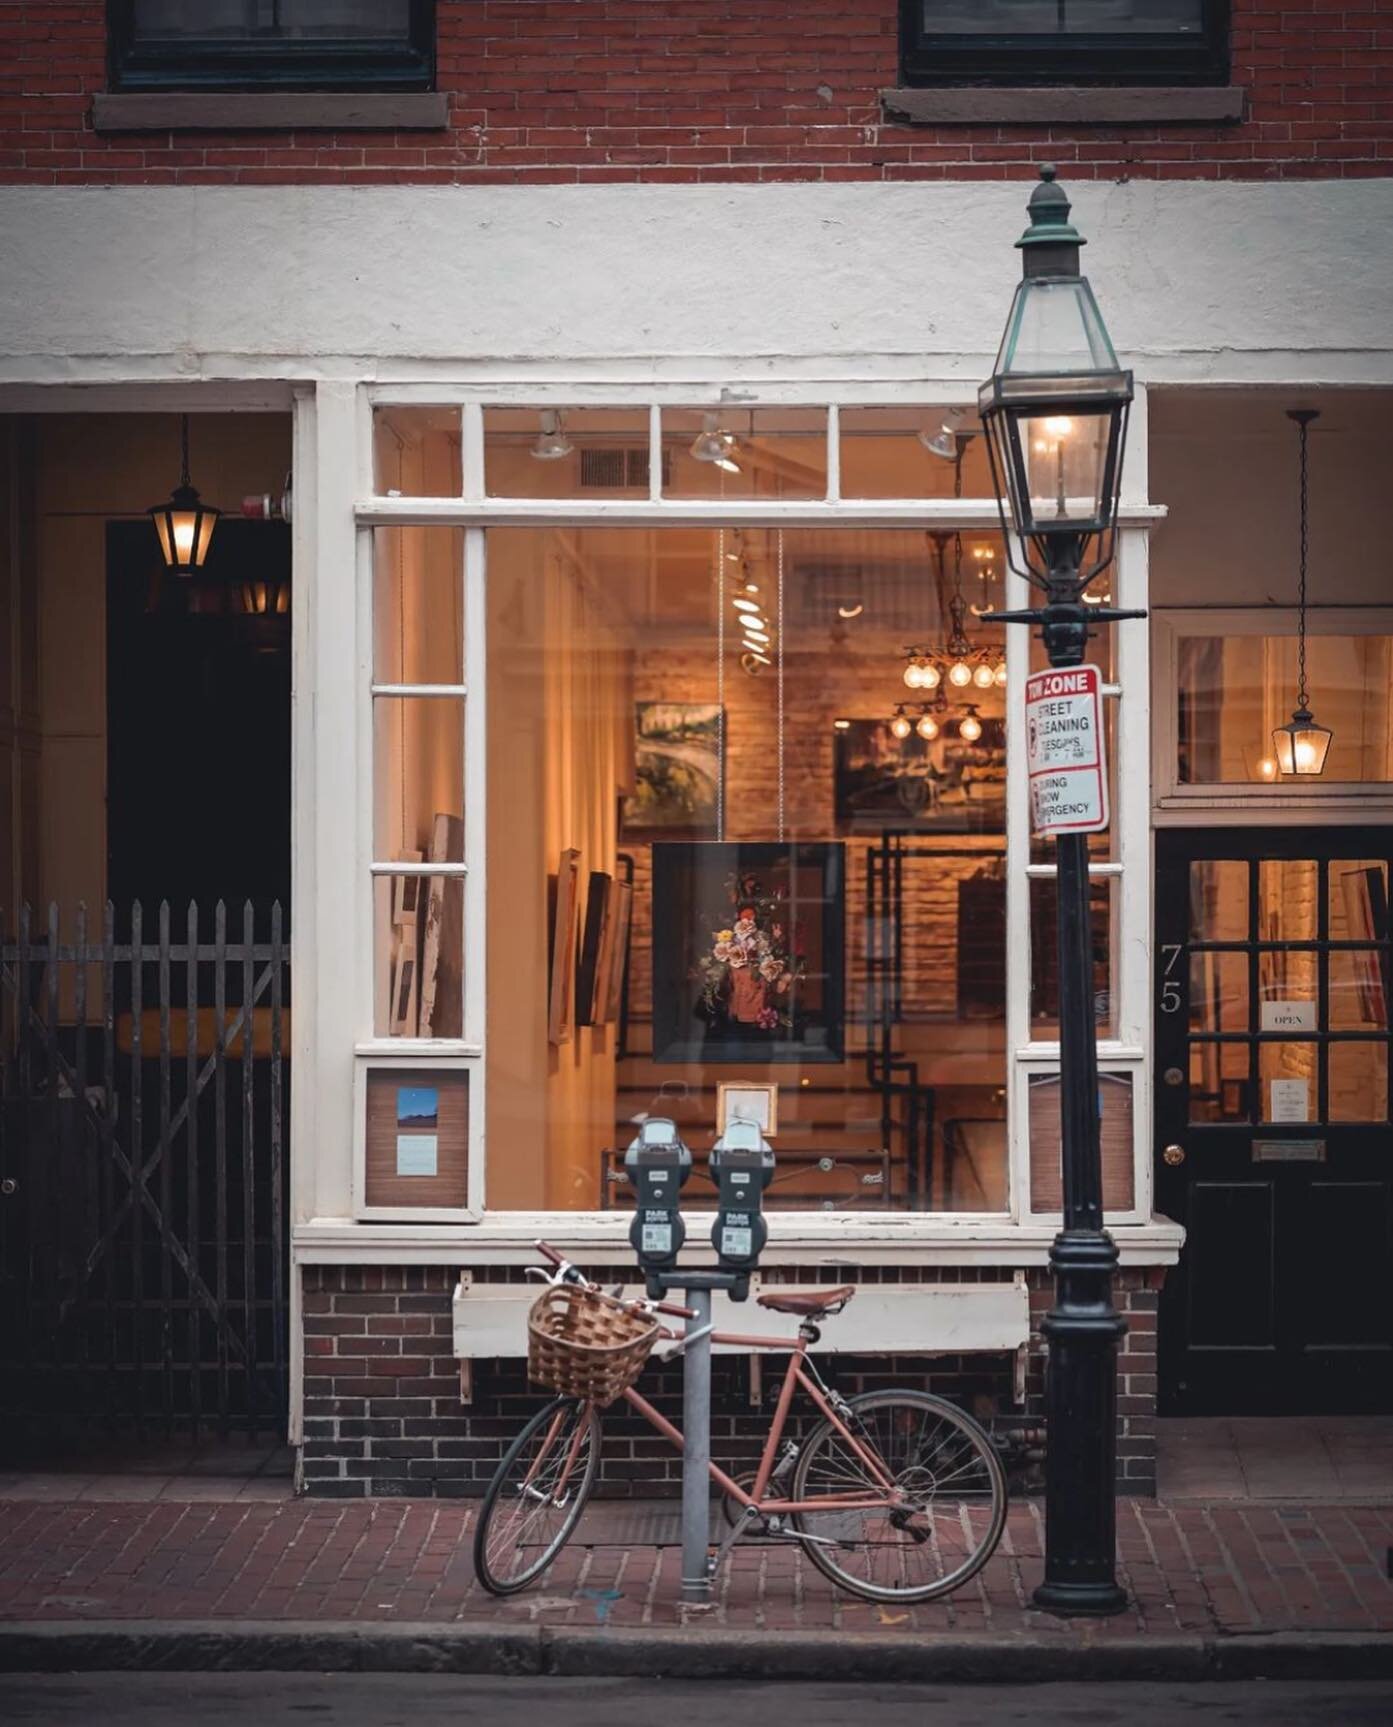 A beautiful photo of the gallery by @brianmcw. #gallery #boston #beaconhill #charlesstreet